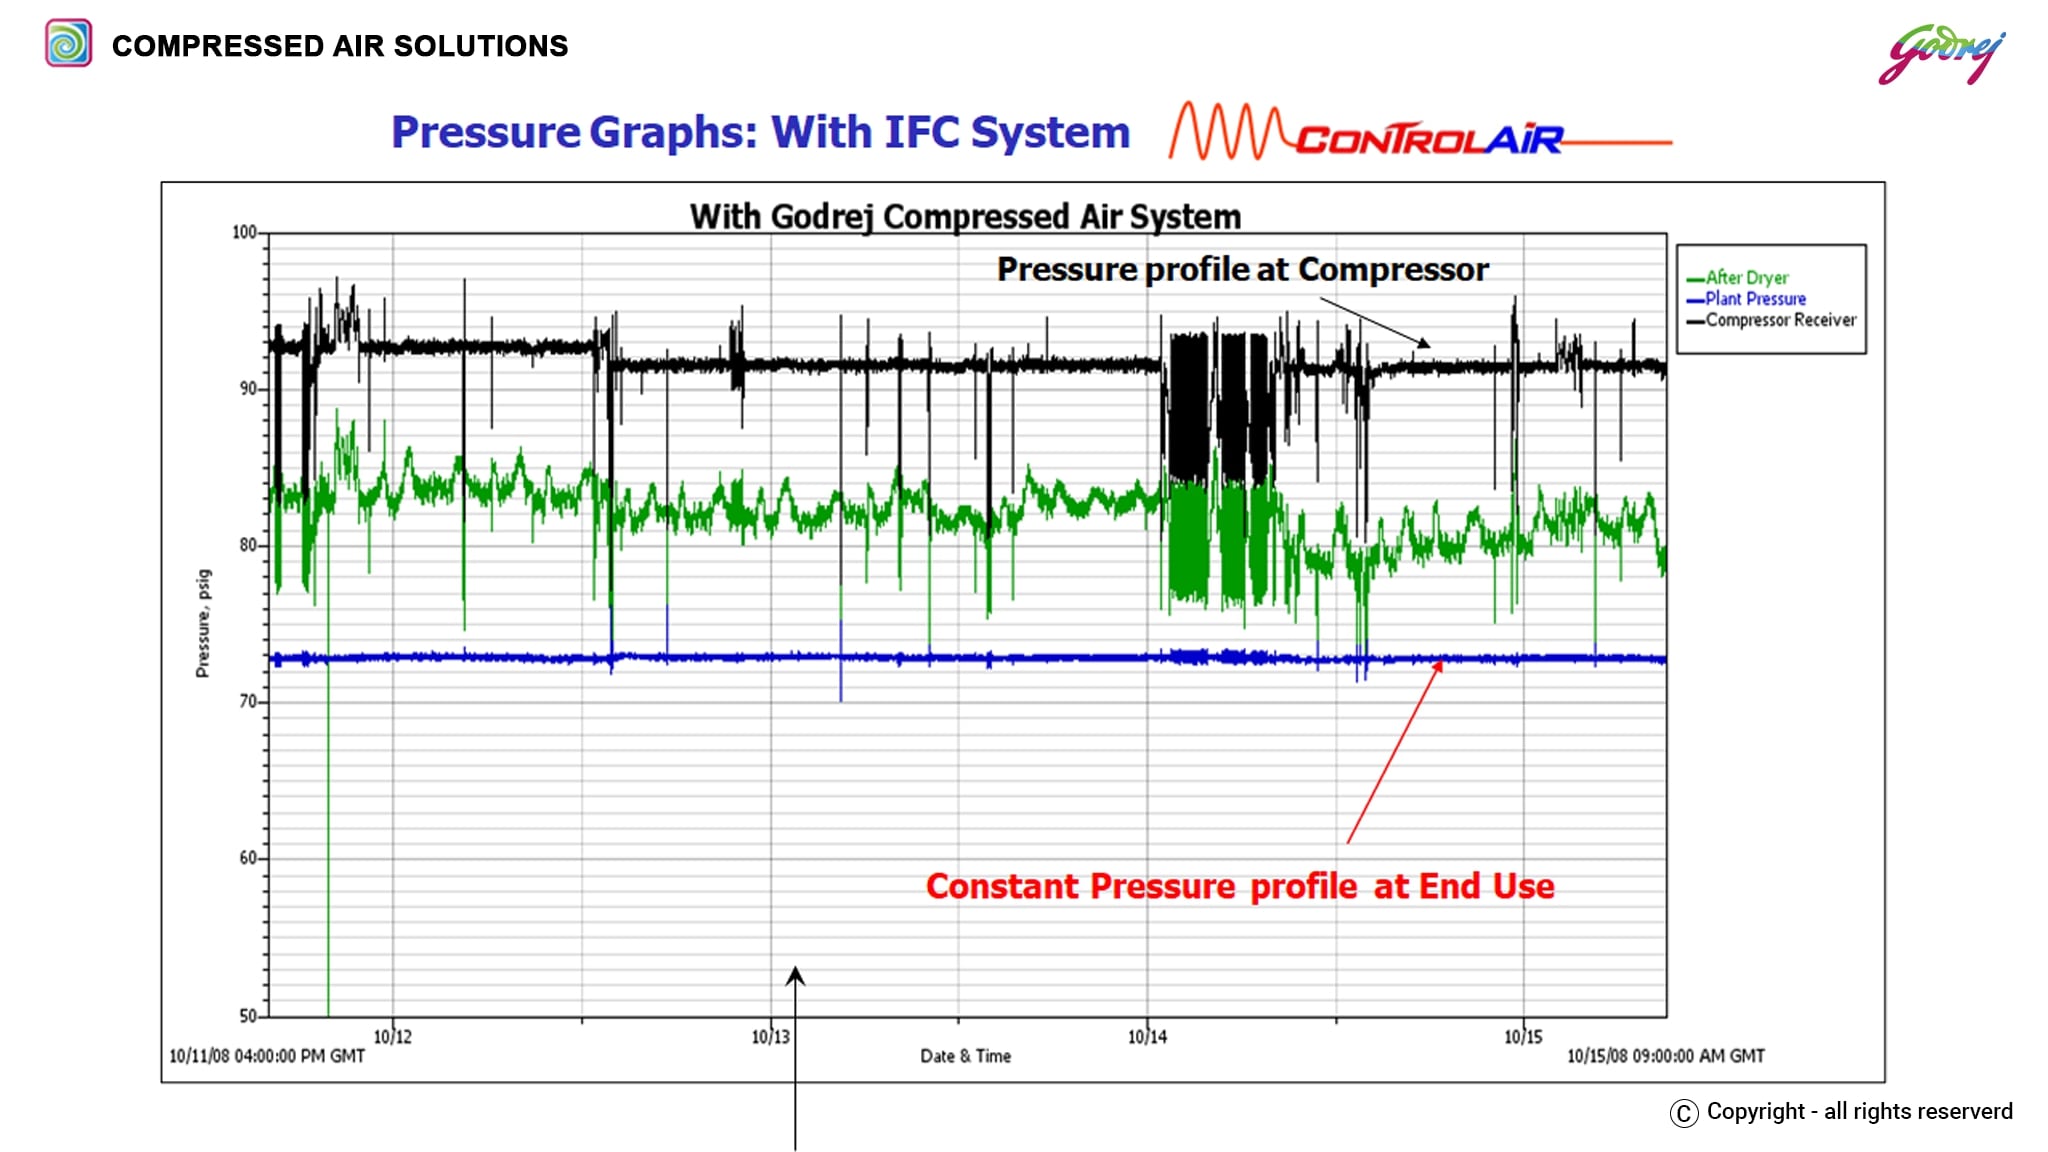 Pressure Graphs With IFC System-ENERGY SAVING SOLUTIONS IN COMPRESSED AIR NETWORK (GODREJ)